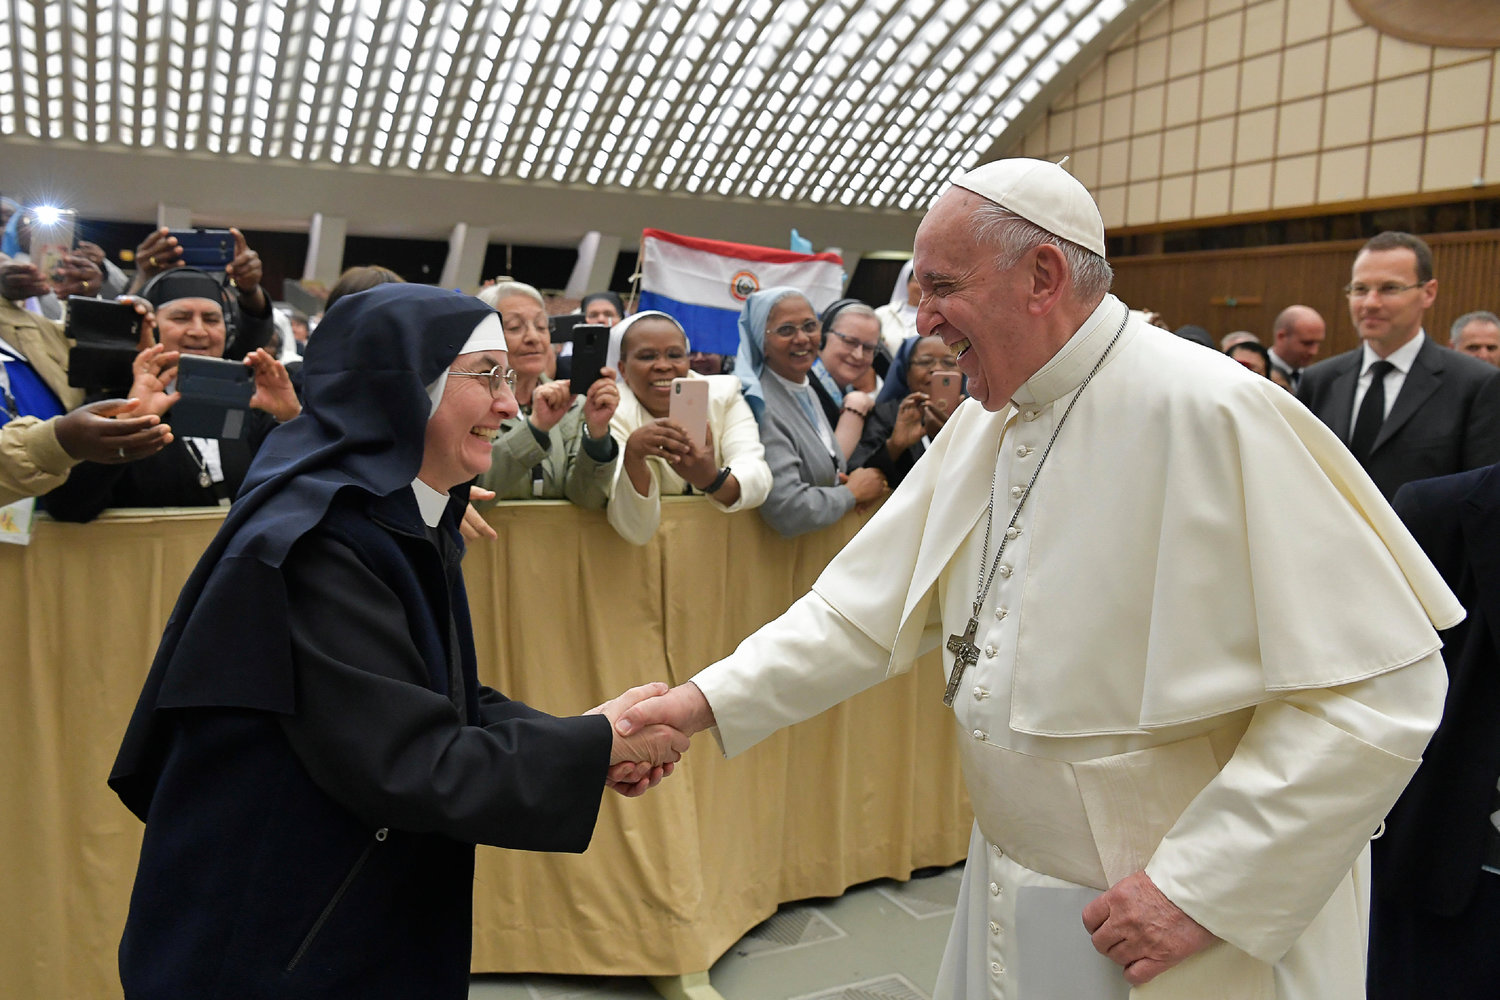 Pope Francis greets a nun during a meeting with 850 superiors general May 10, 2019, at the Vatican, who were in Rome for the plenary assembly of the International Union of Superiors General. The organization represents more than 450,000 women religious in more than 100 countries.